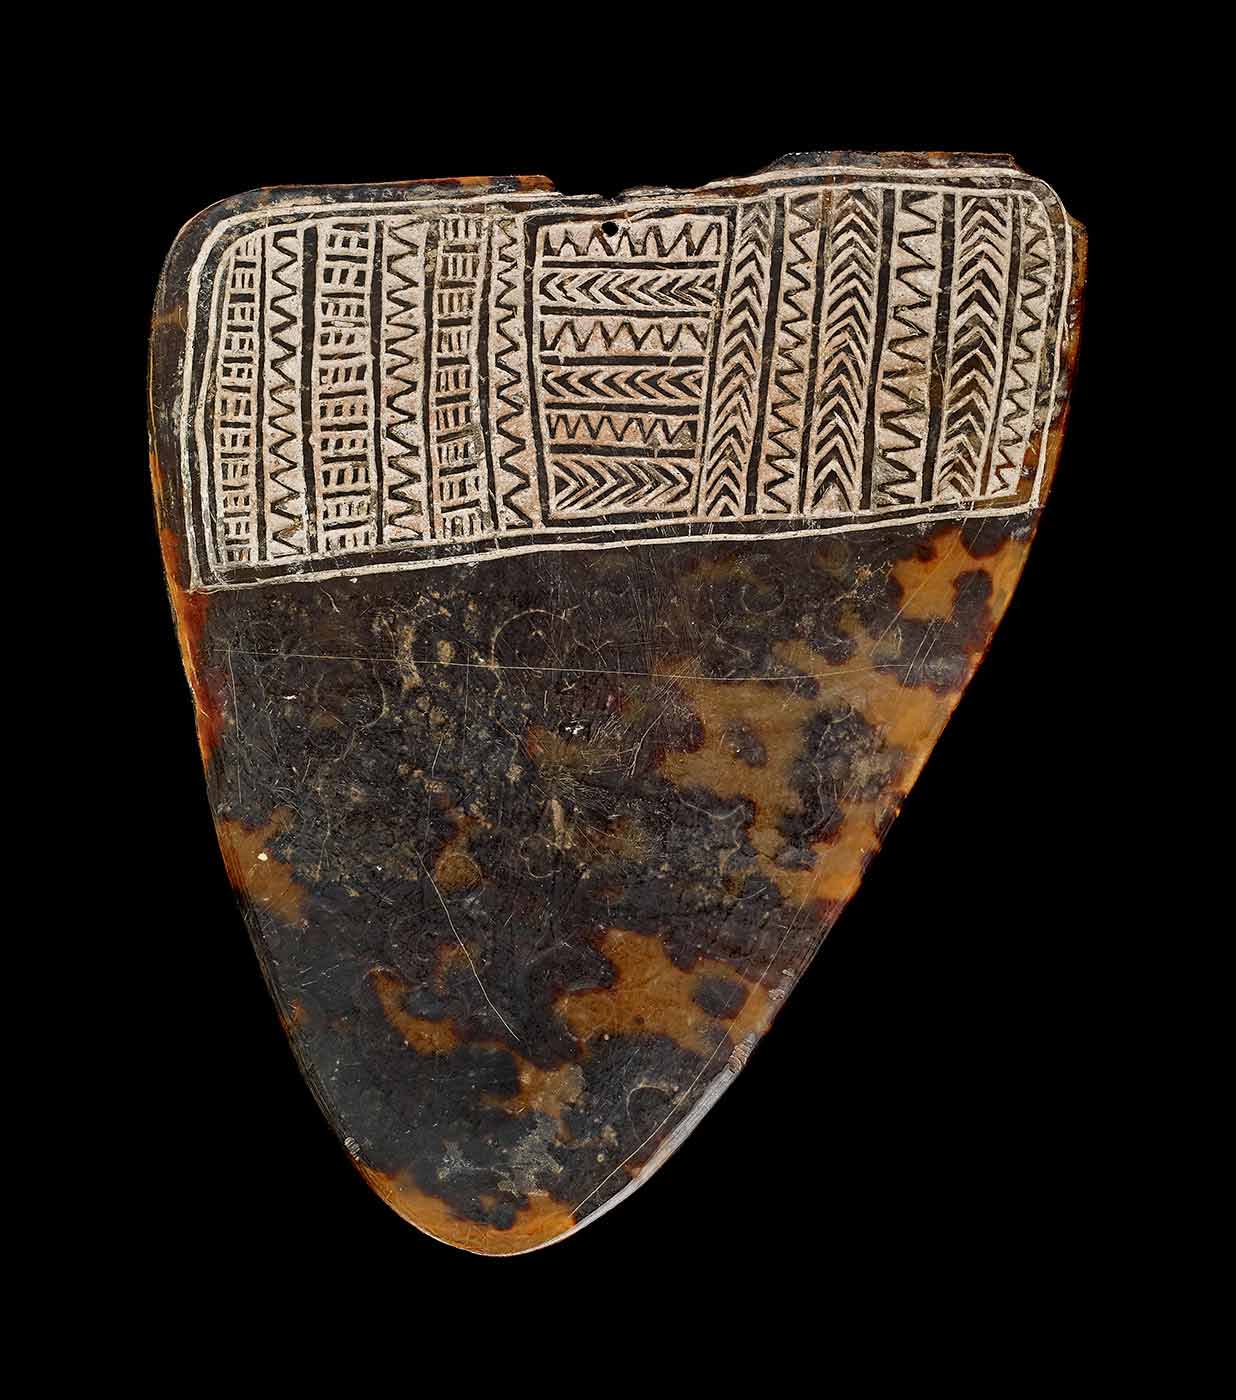 Triangular ornament made of turtle-shell with an inscribed design across the top.